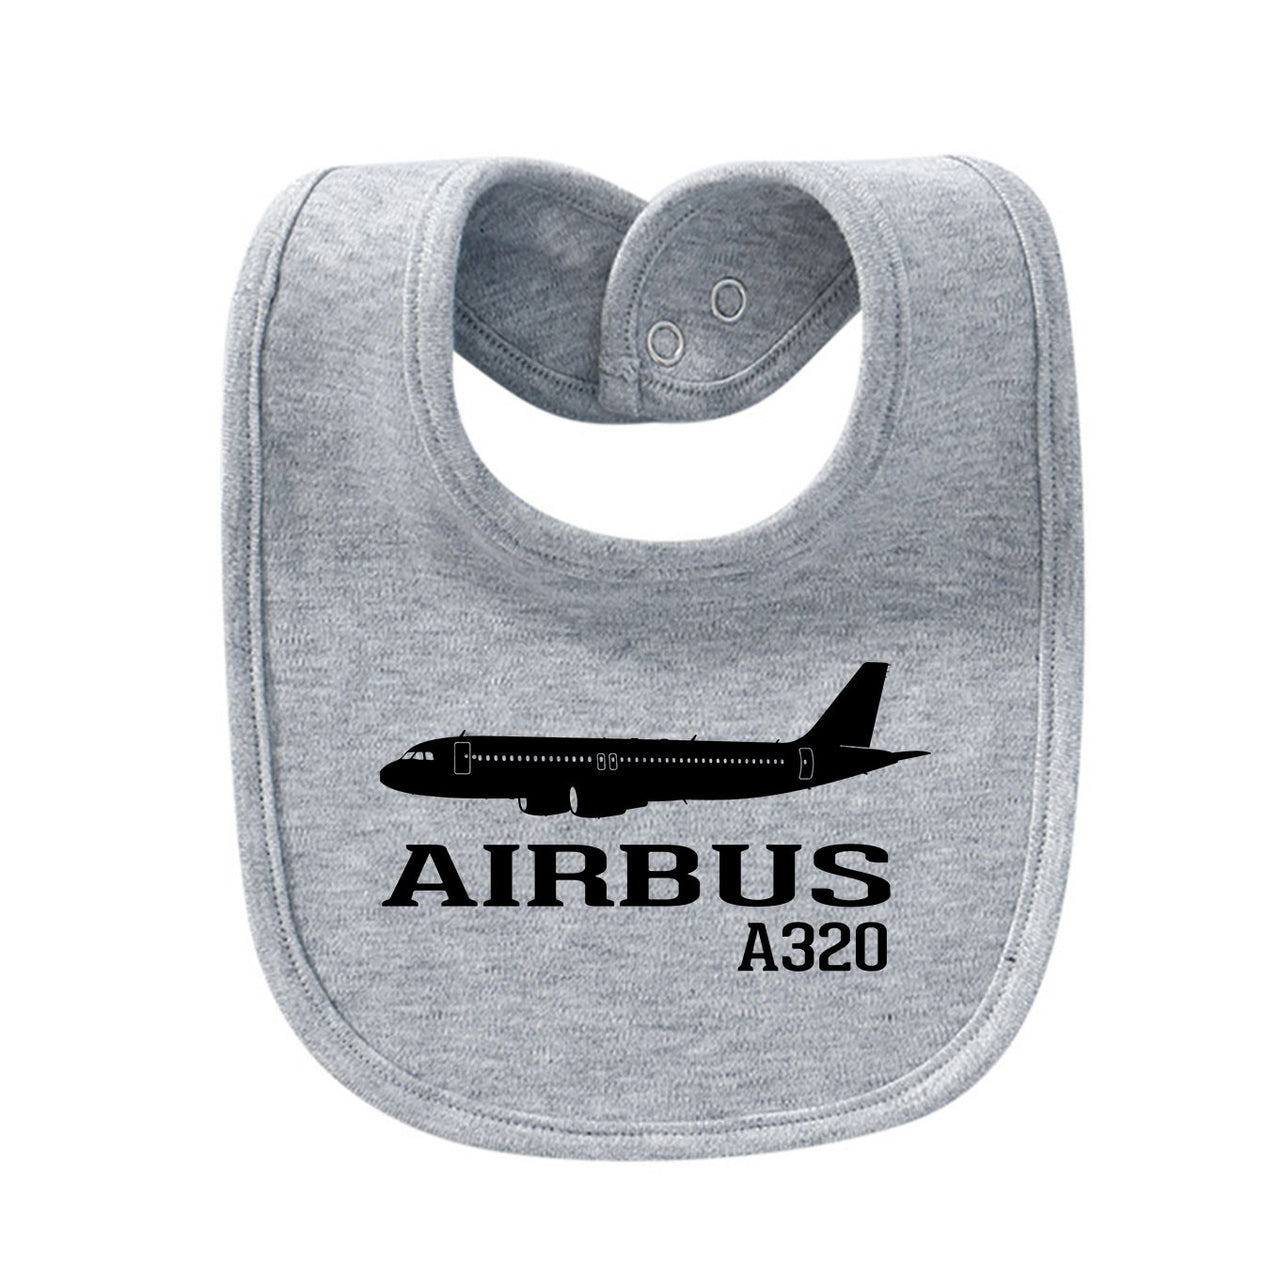 Airbus A320 Printed Designed Baby Saliva & Feeding Towels